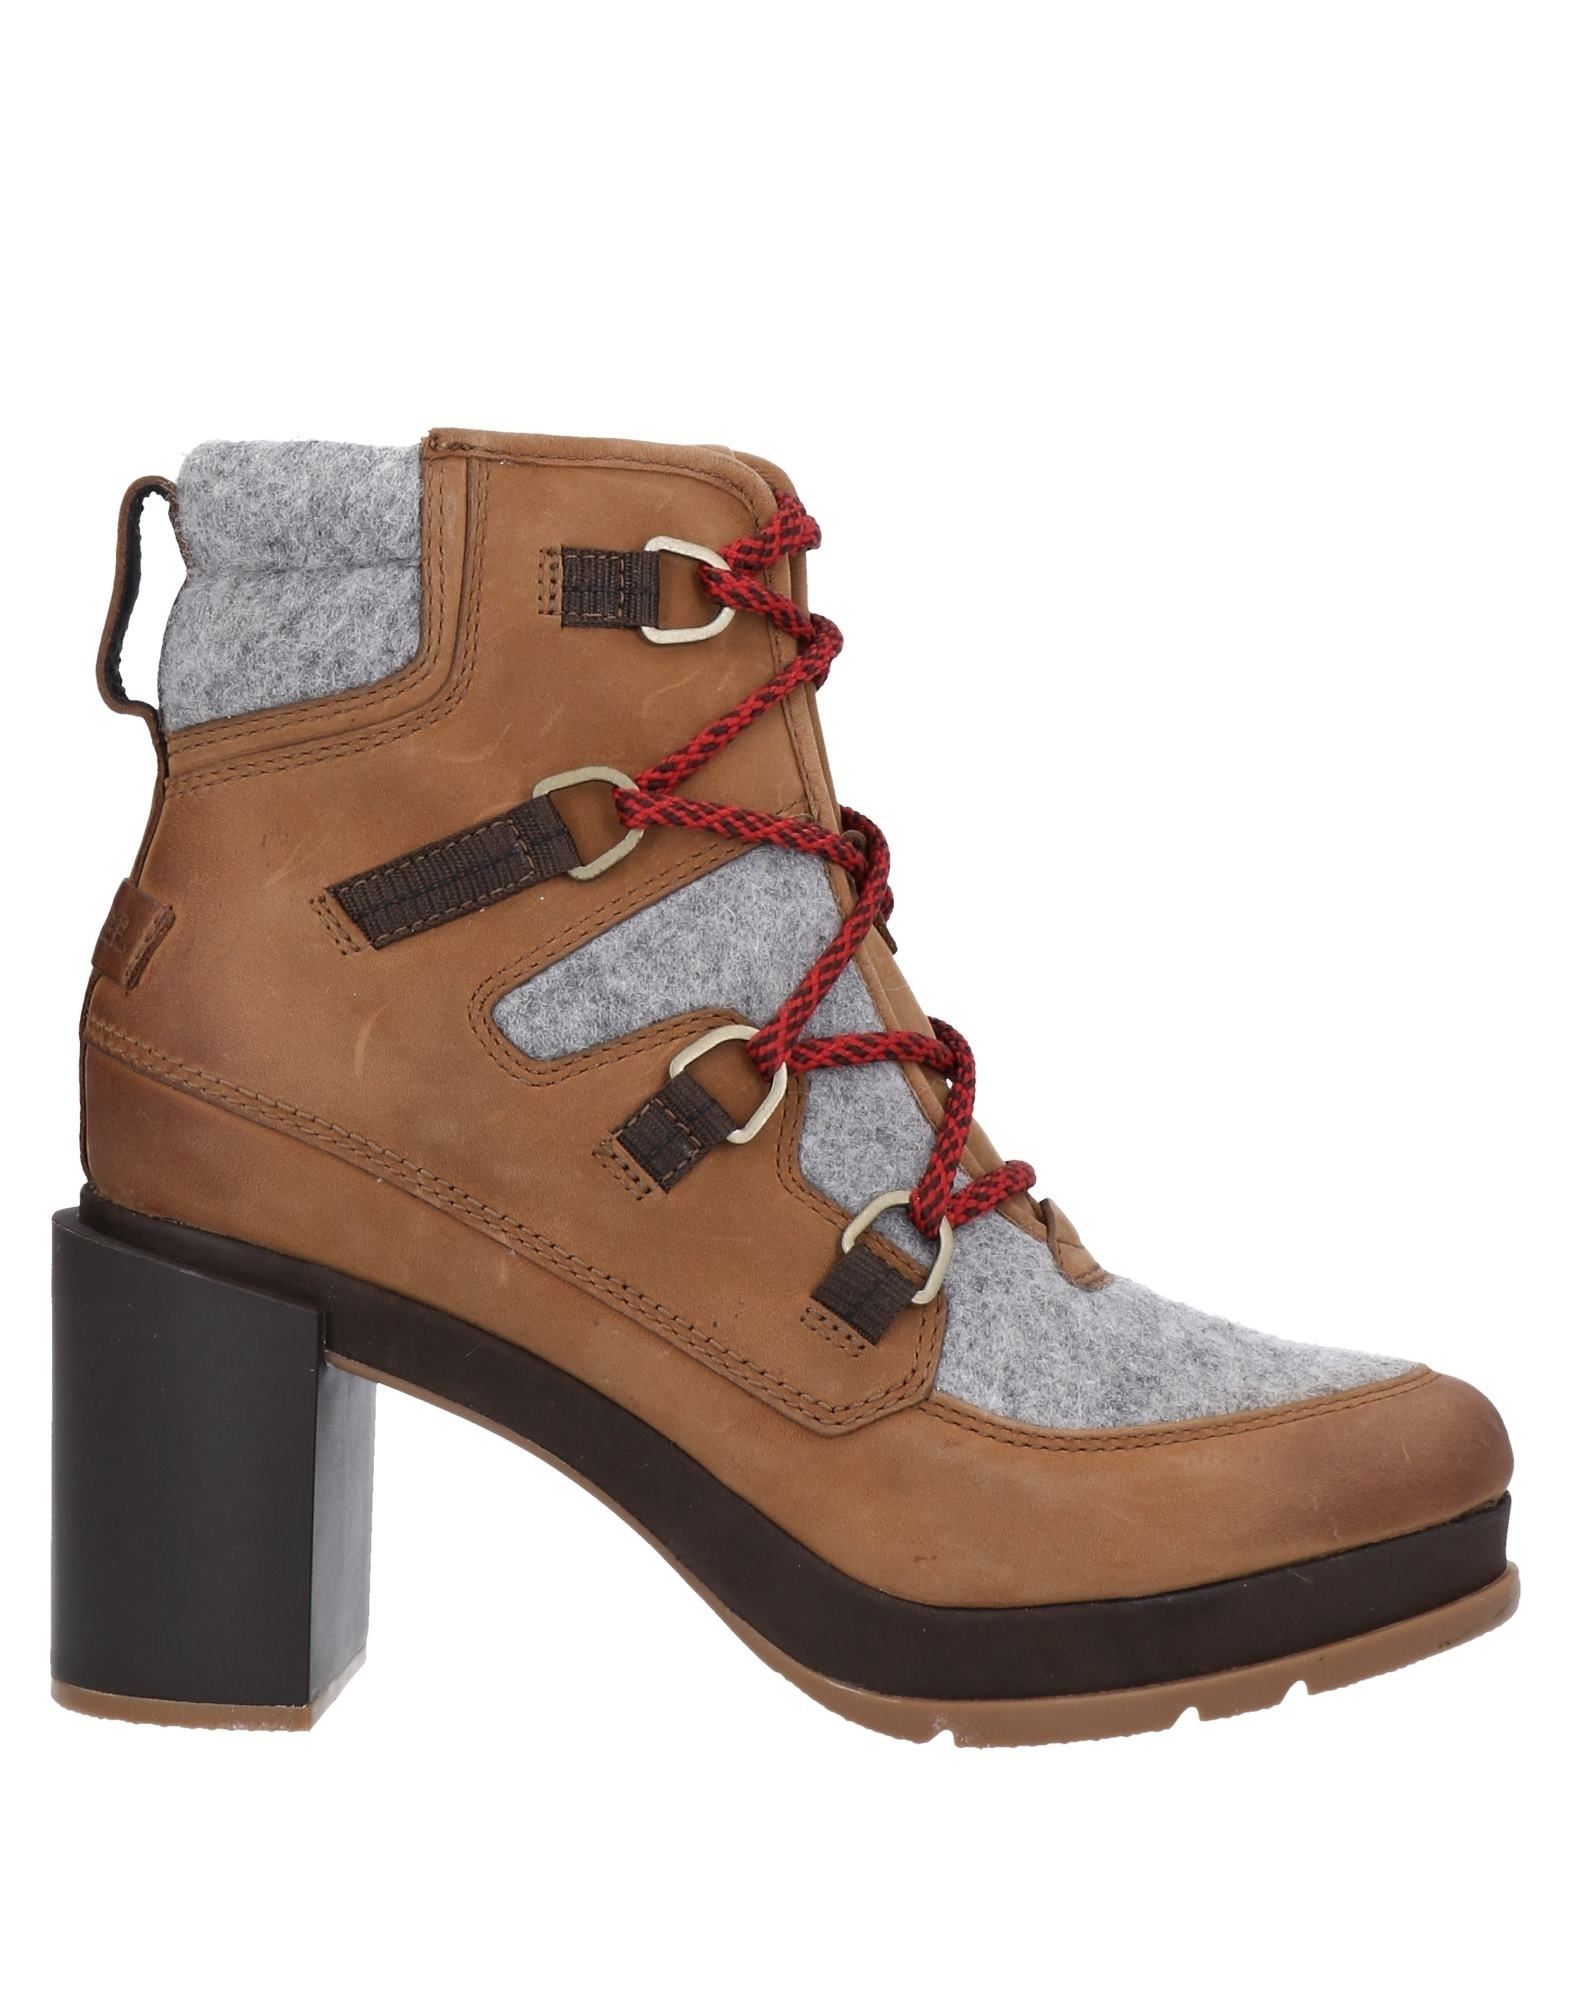 SOREL ANKLE BOOTS,17021917RA 6